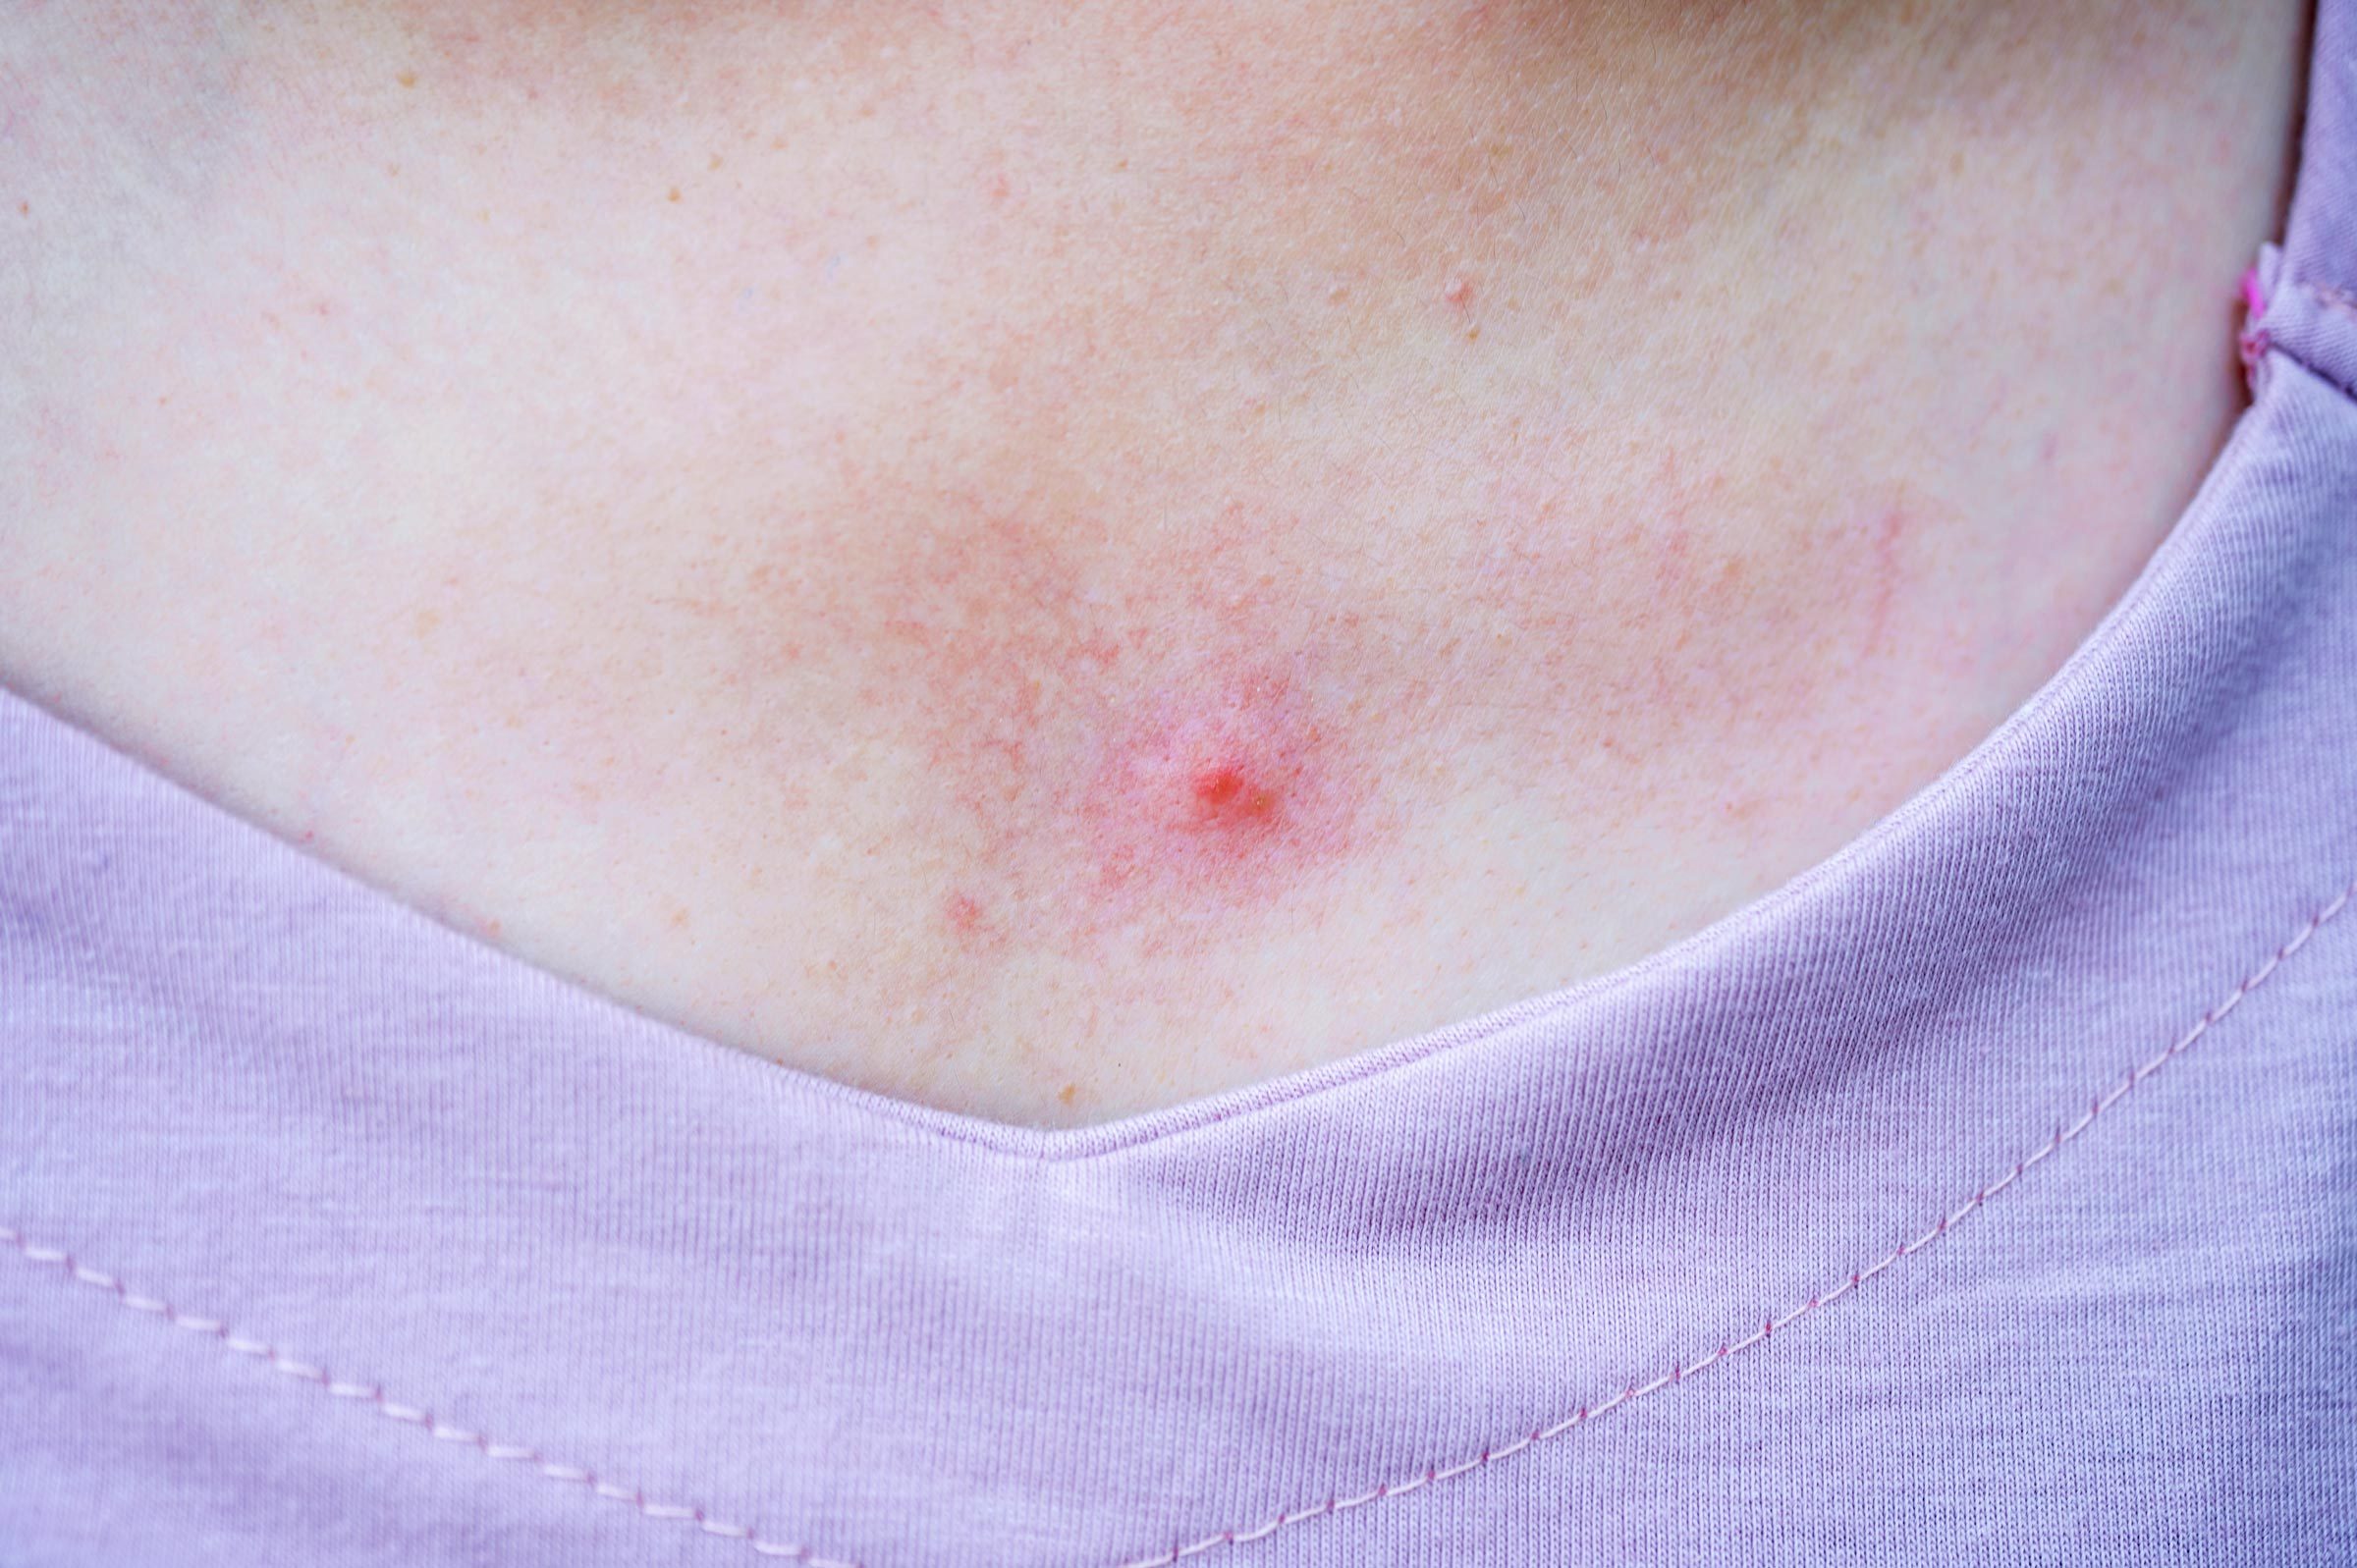 Sweat Pimples on chest close up